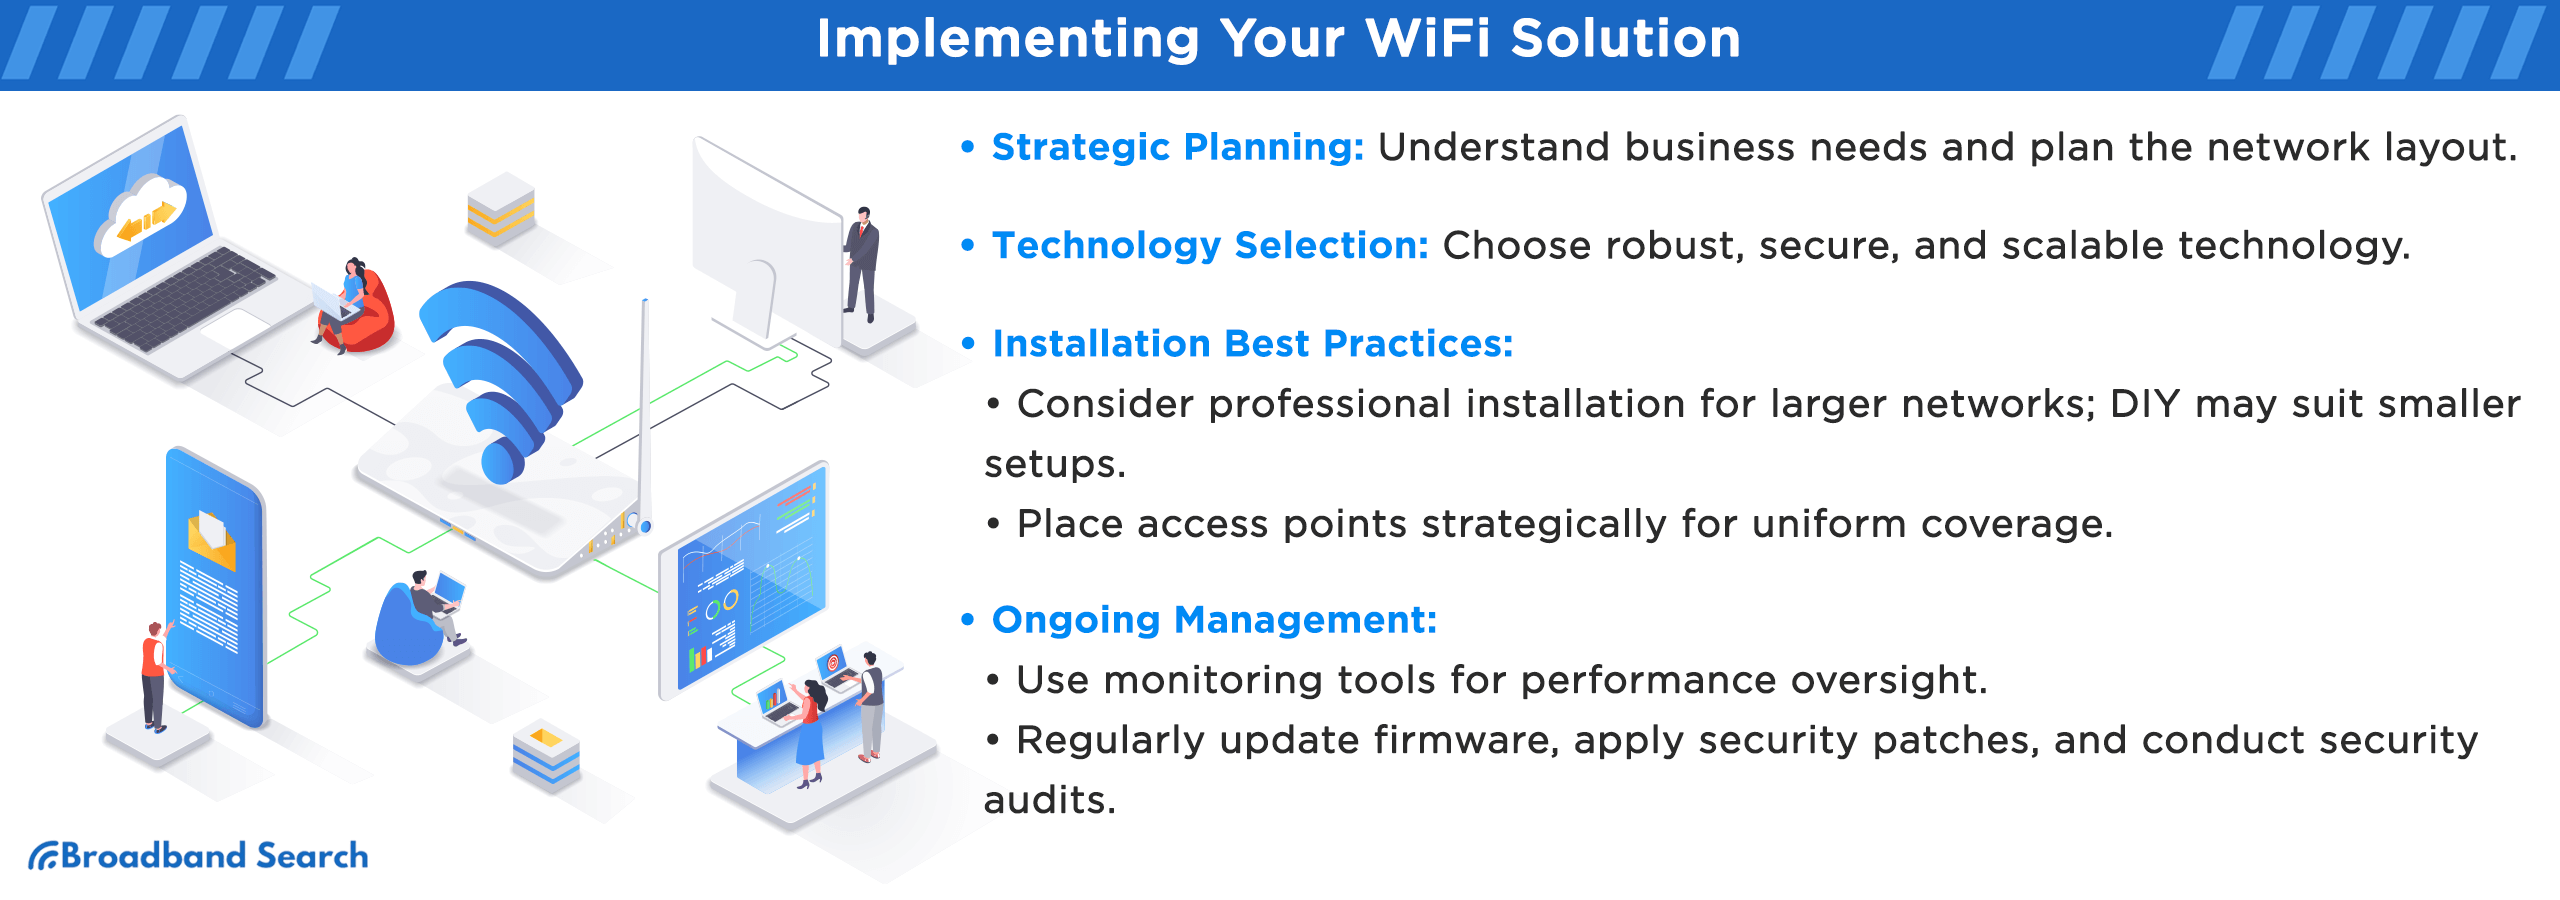 Strategies on implementing your Wi-Fi solutions